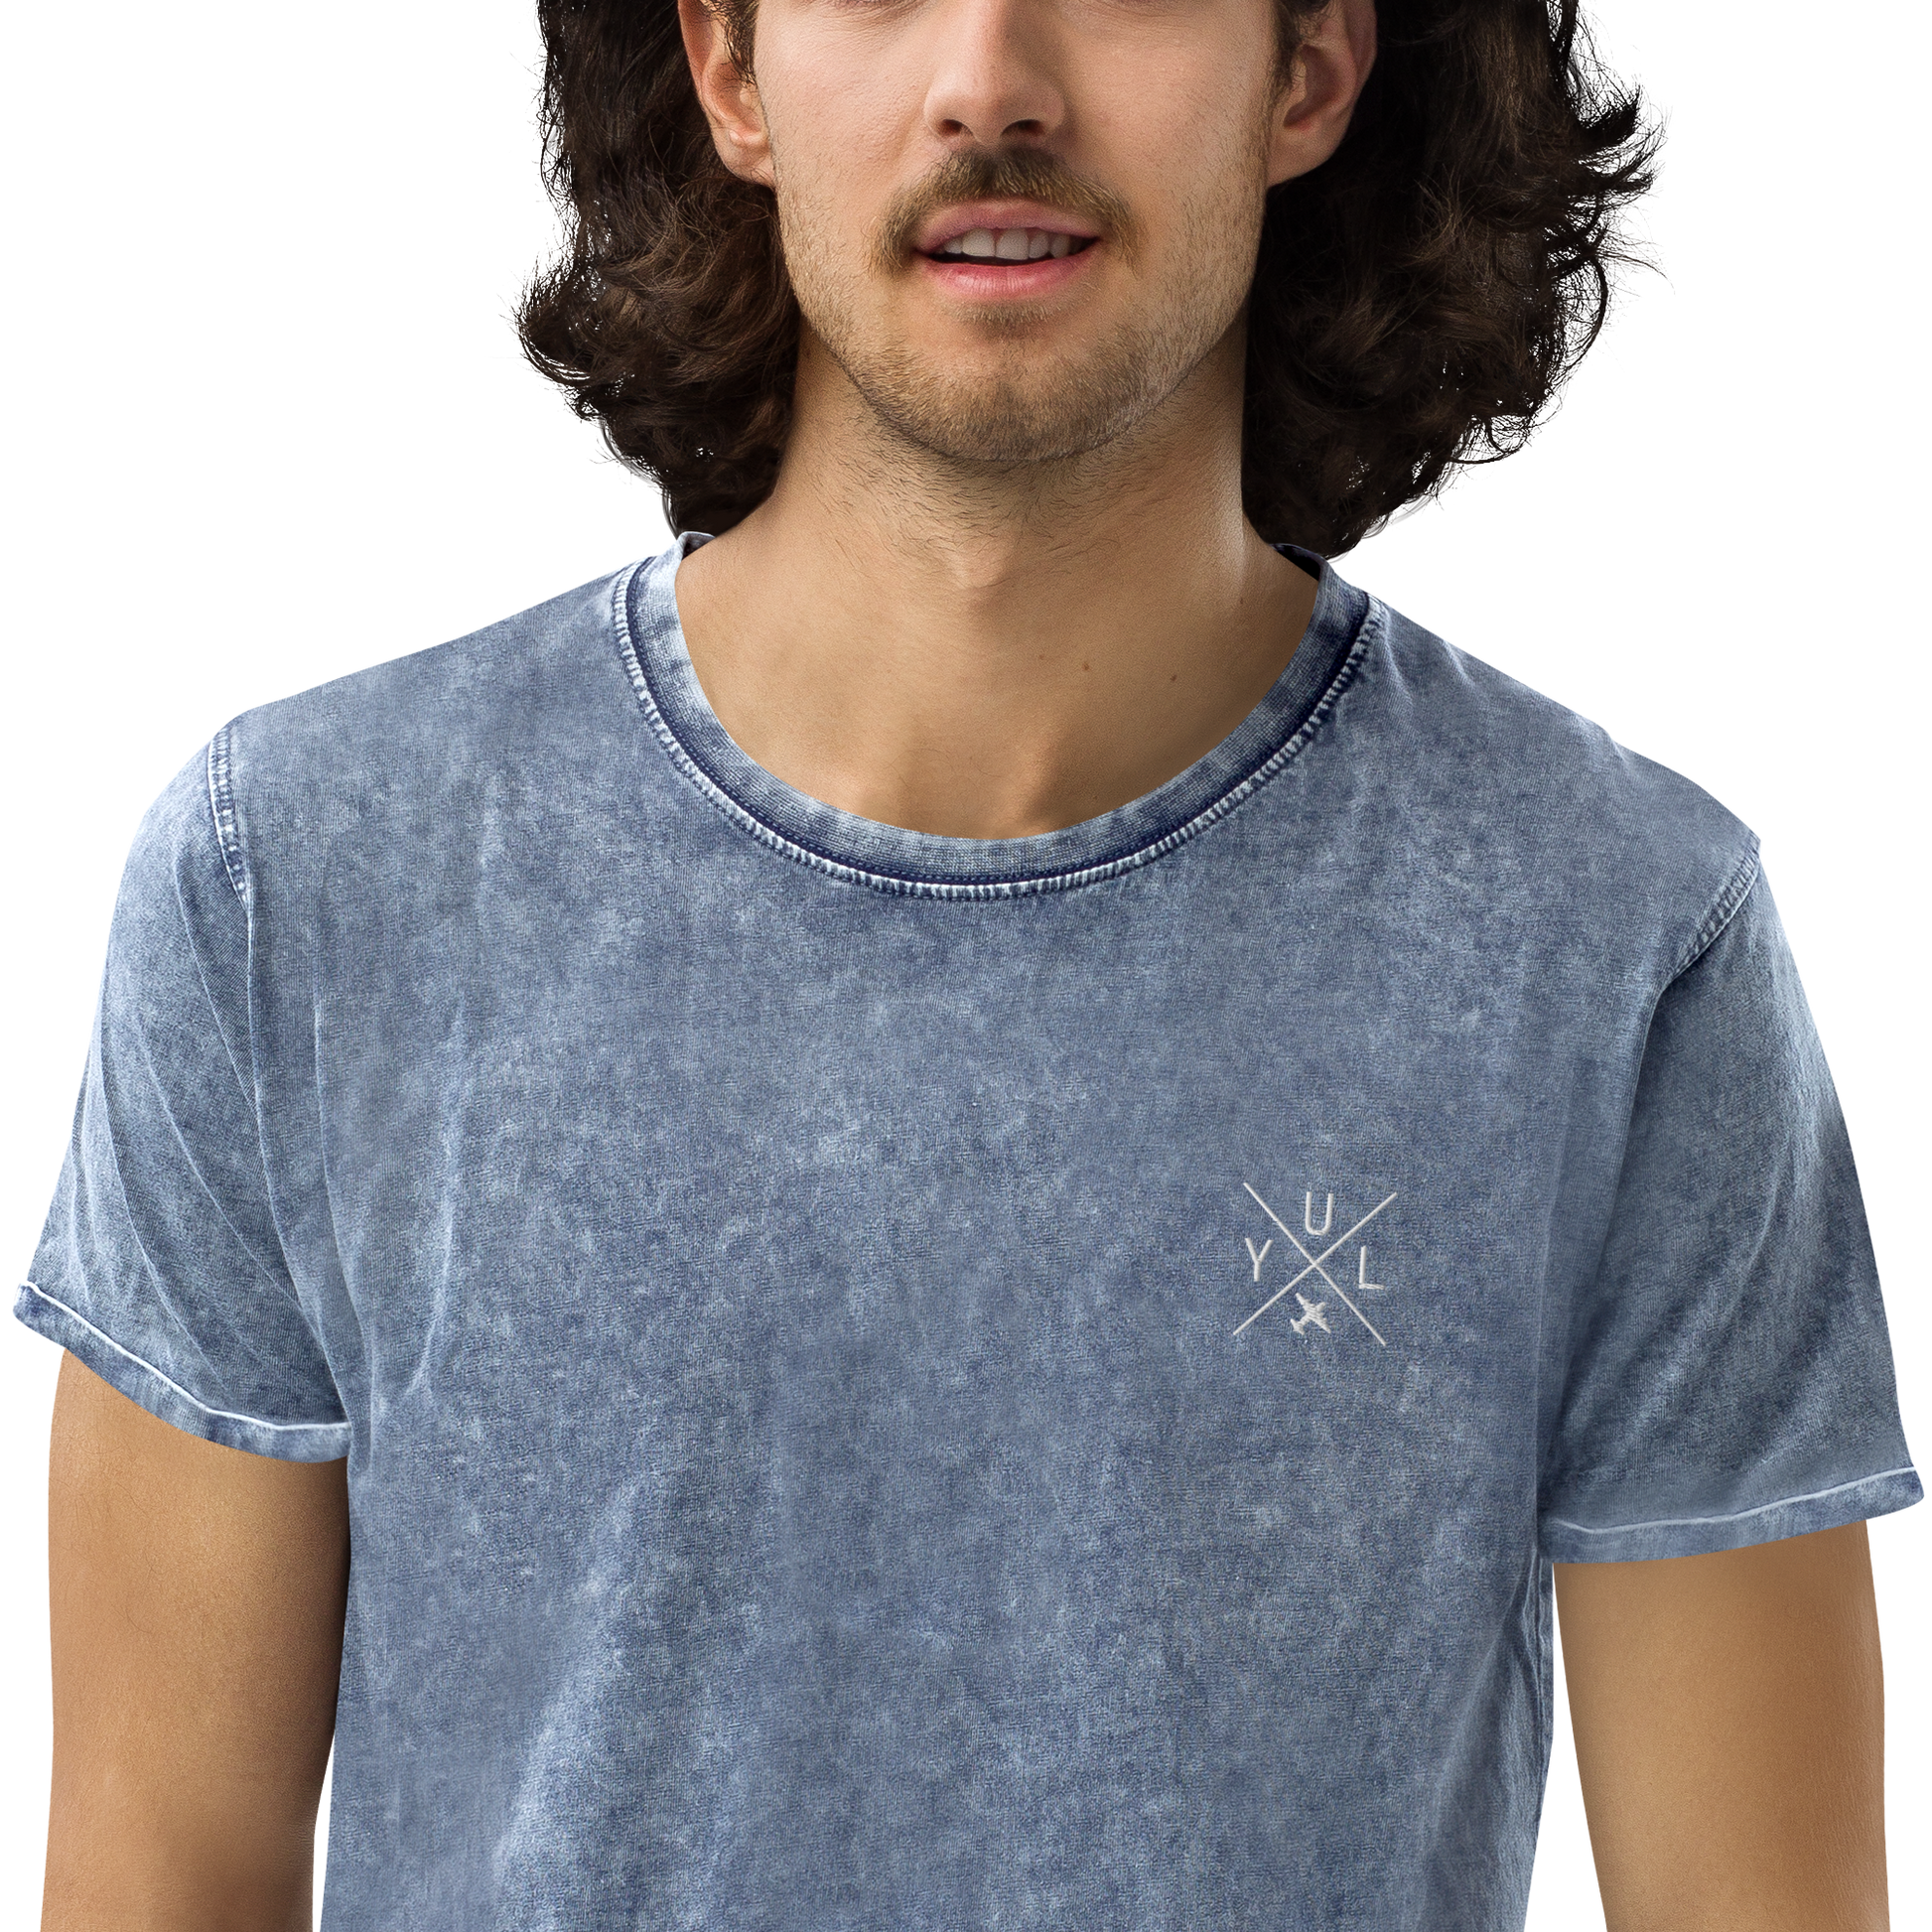 YHM Designs - YUL Montreal Denim T-Shirt - Crossed-X Design with Airport Code and Vintage Propliner - White Embroidery - Image 12